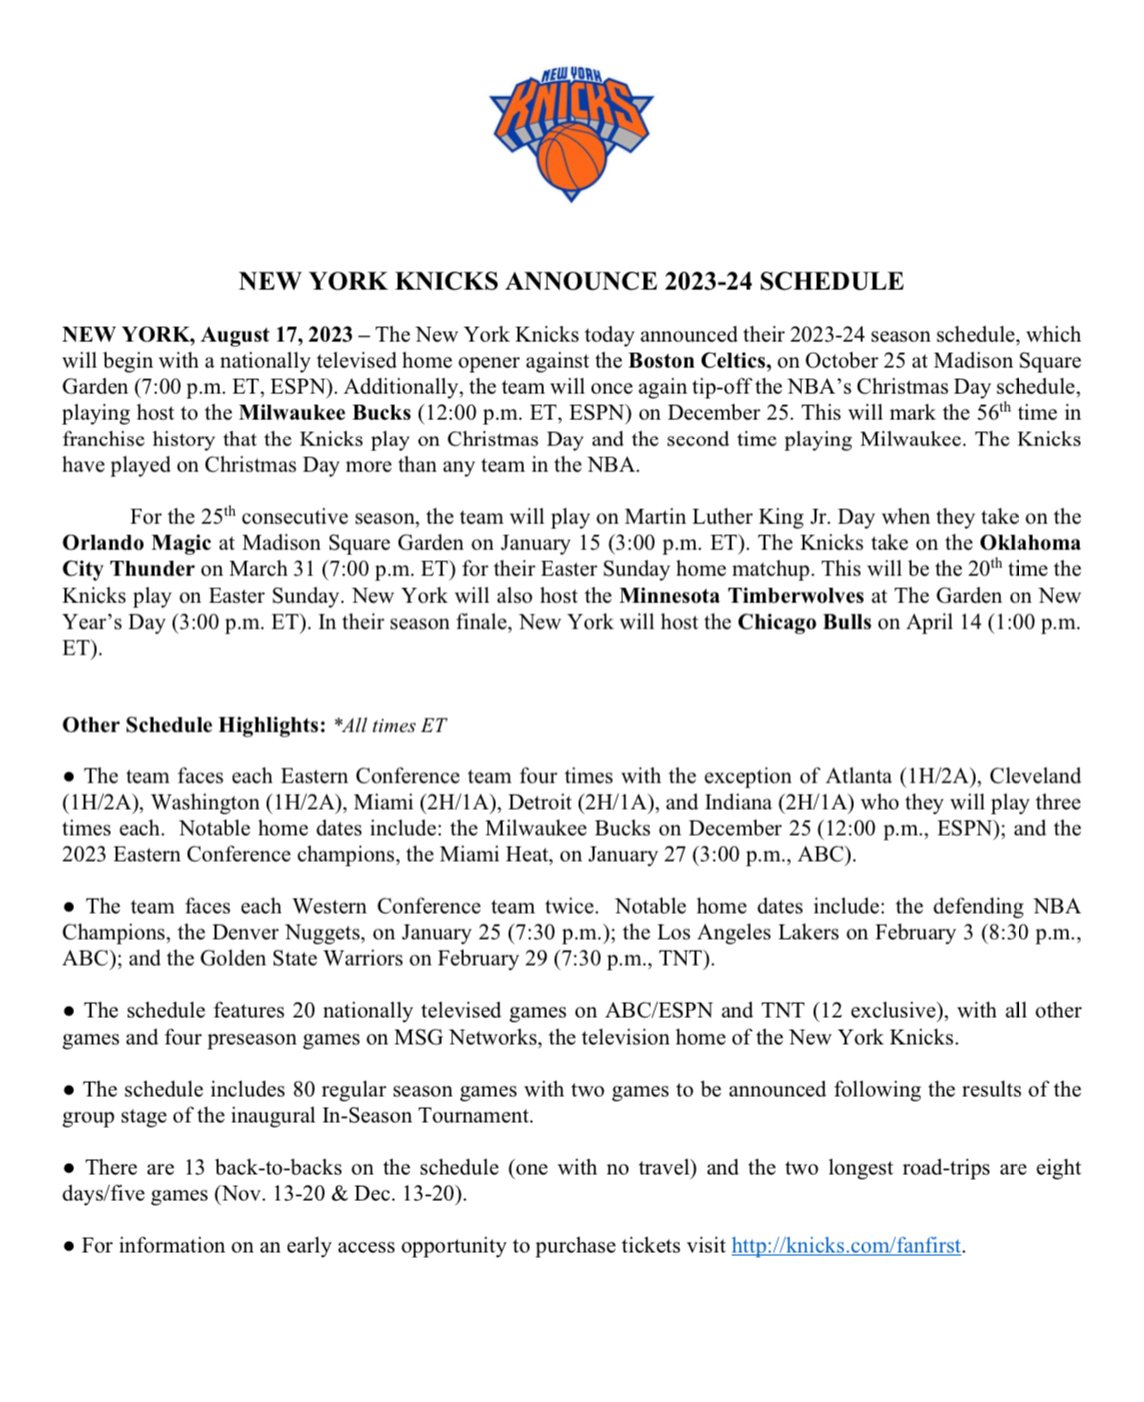 Get New York Knicks tickets for the 2023-24 season schedule